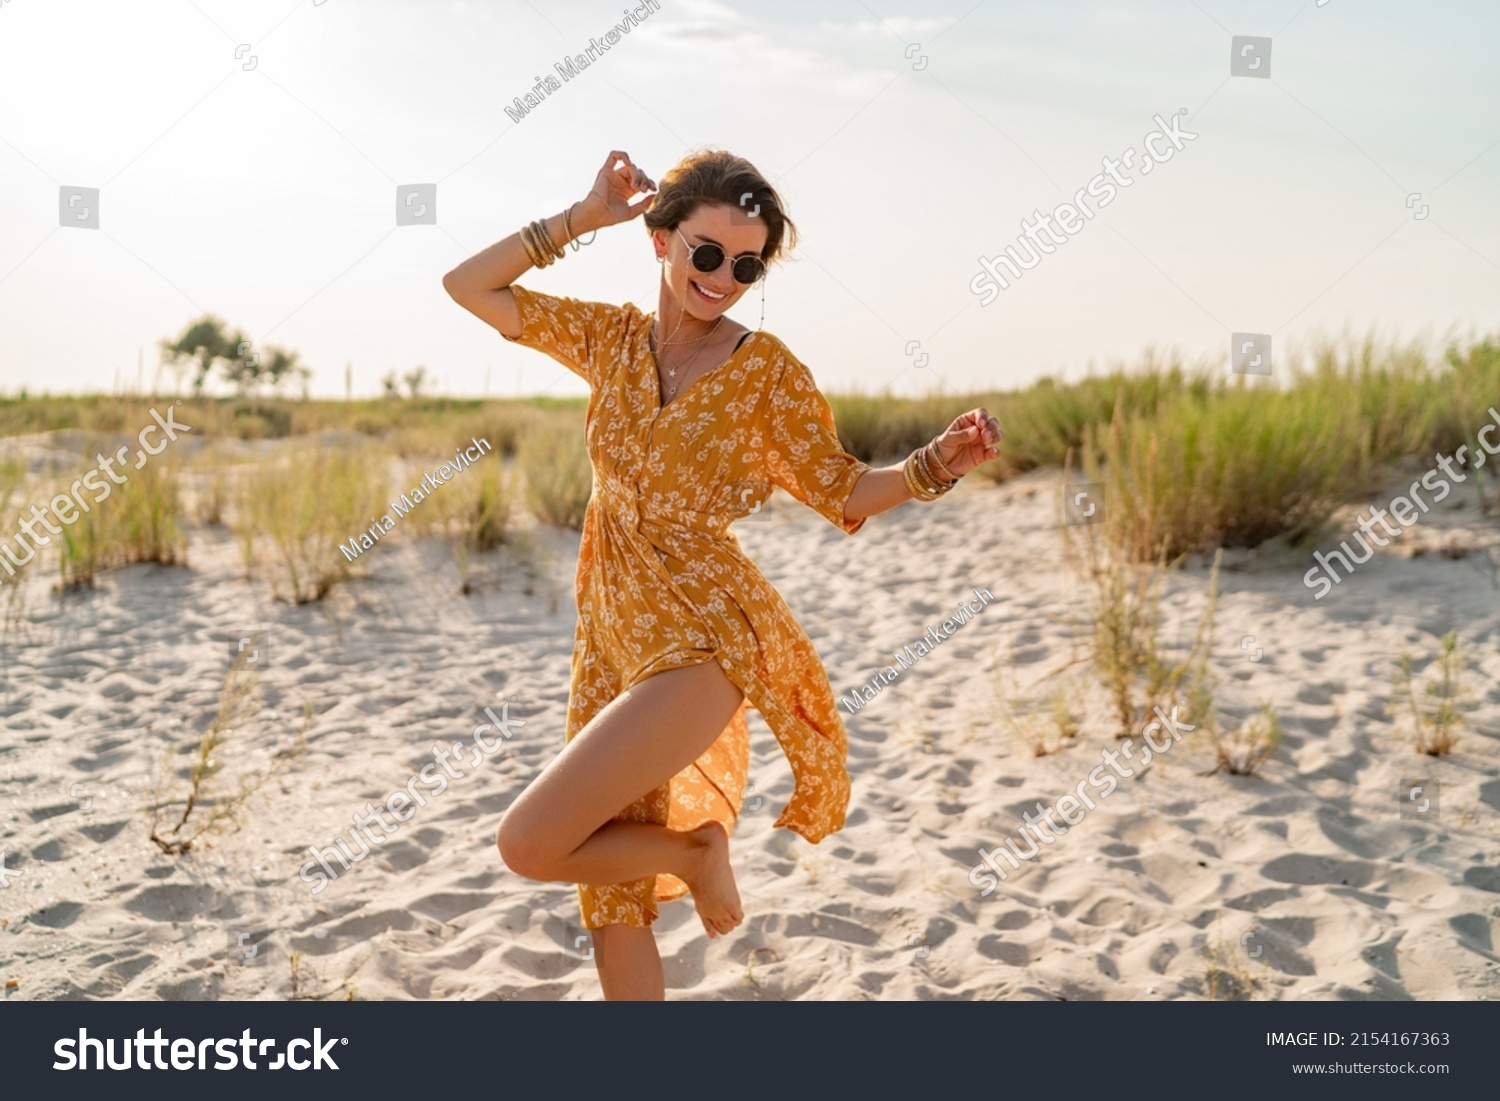 stylish attractive slim smiling woman on beach in summer style fashion trend outfit carefree and happy, feeling freedom, wearing yellow printed dress boho style chic and sunglasses #2154167363